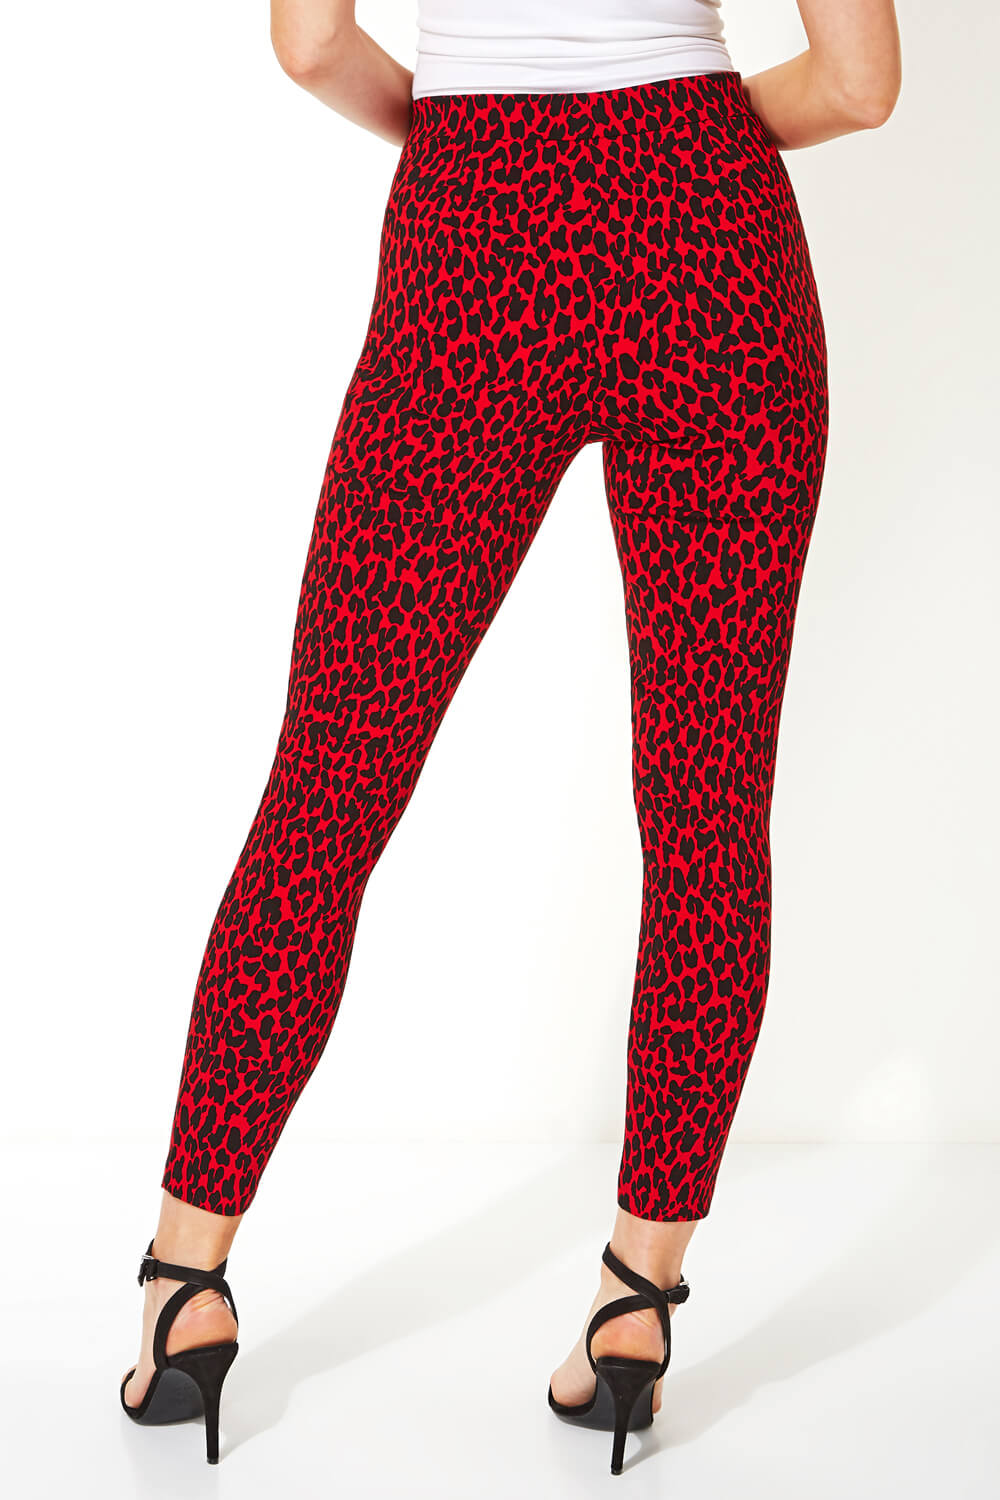 Red Animal Print Full Length Trousers , Image 3 of 5